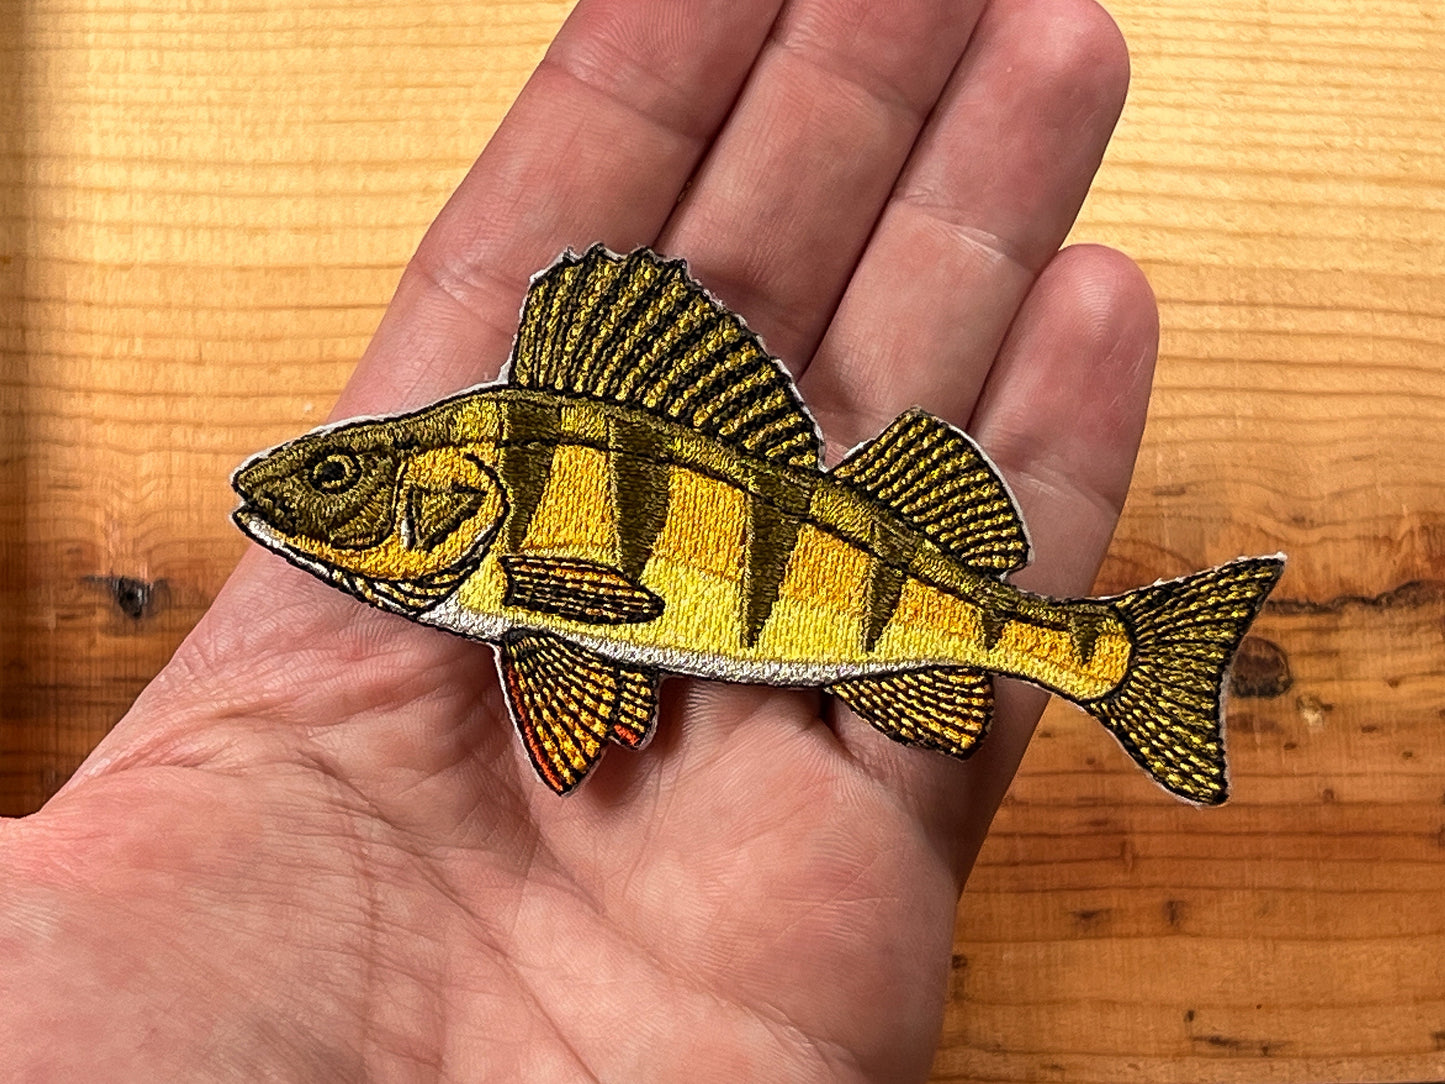 Yellow Perch Patch